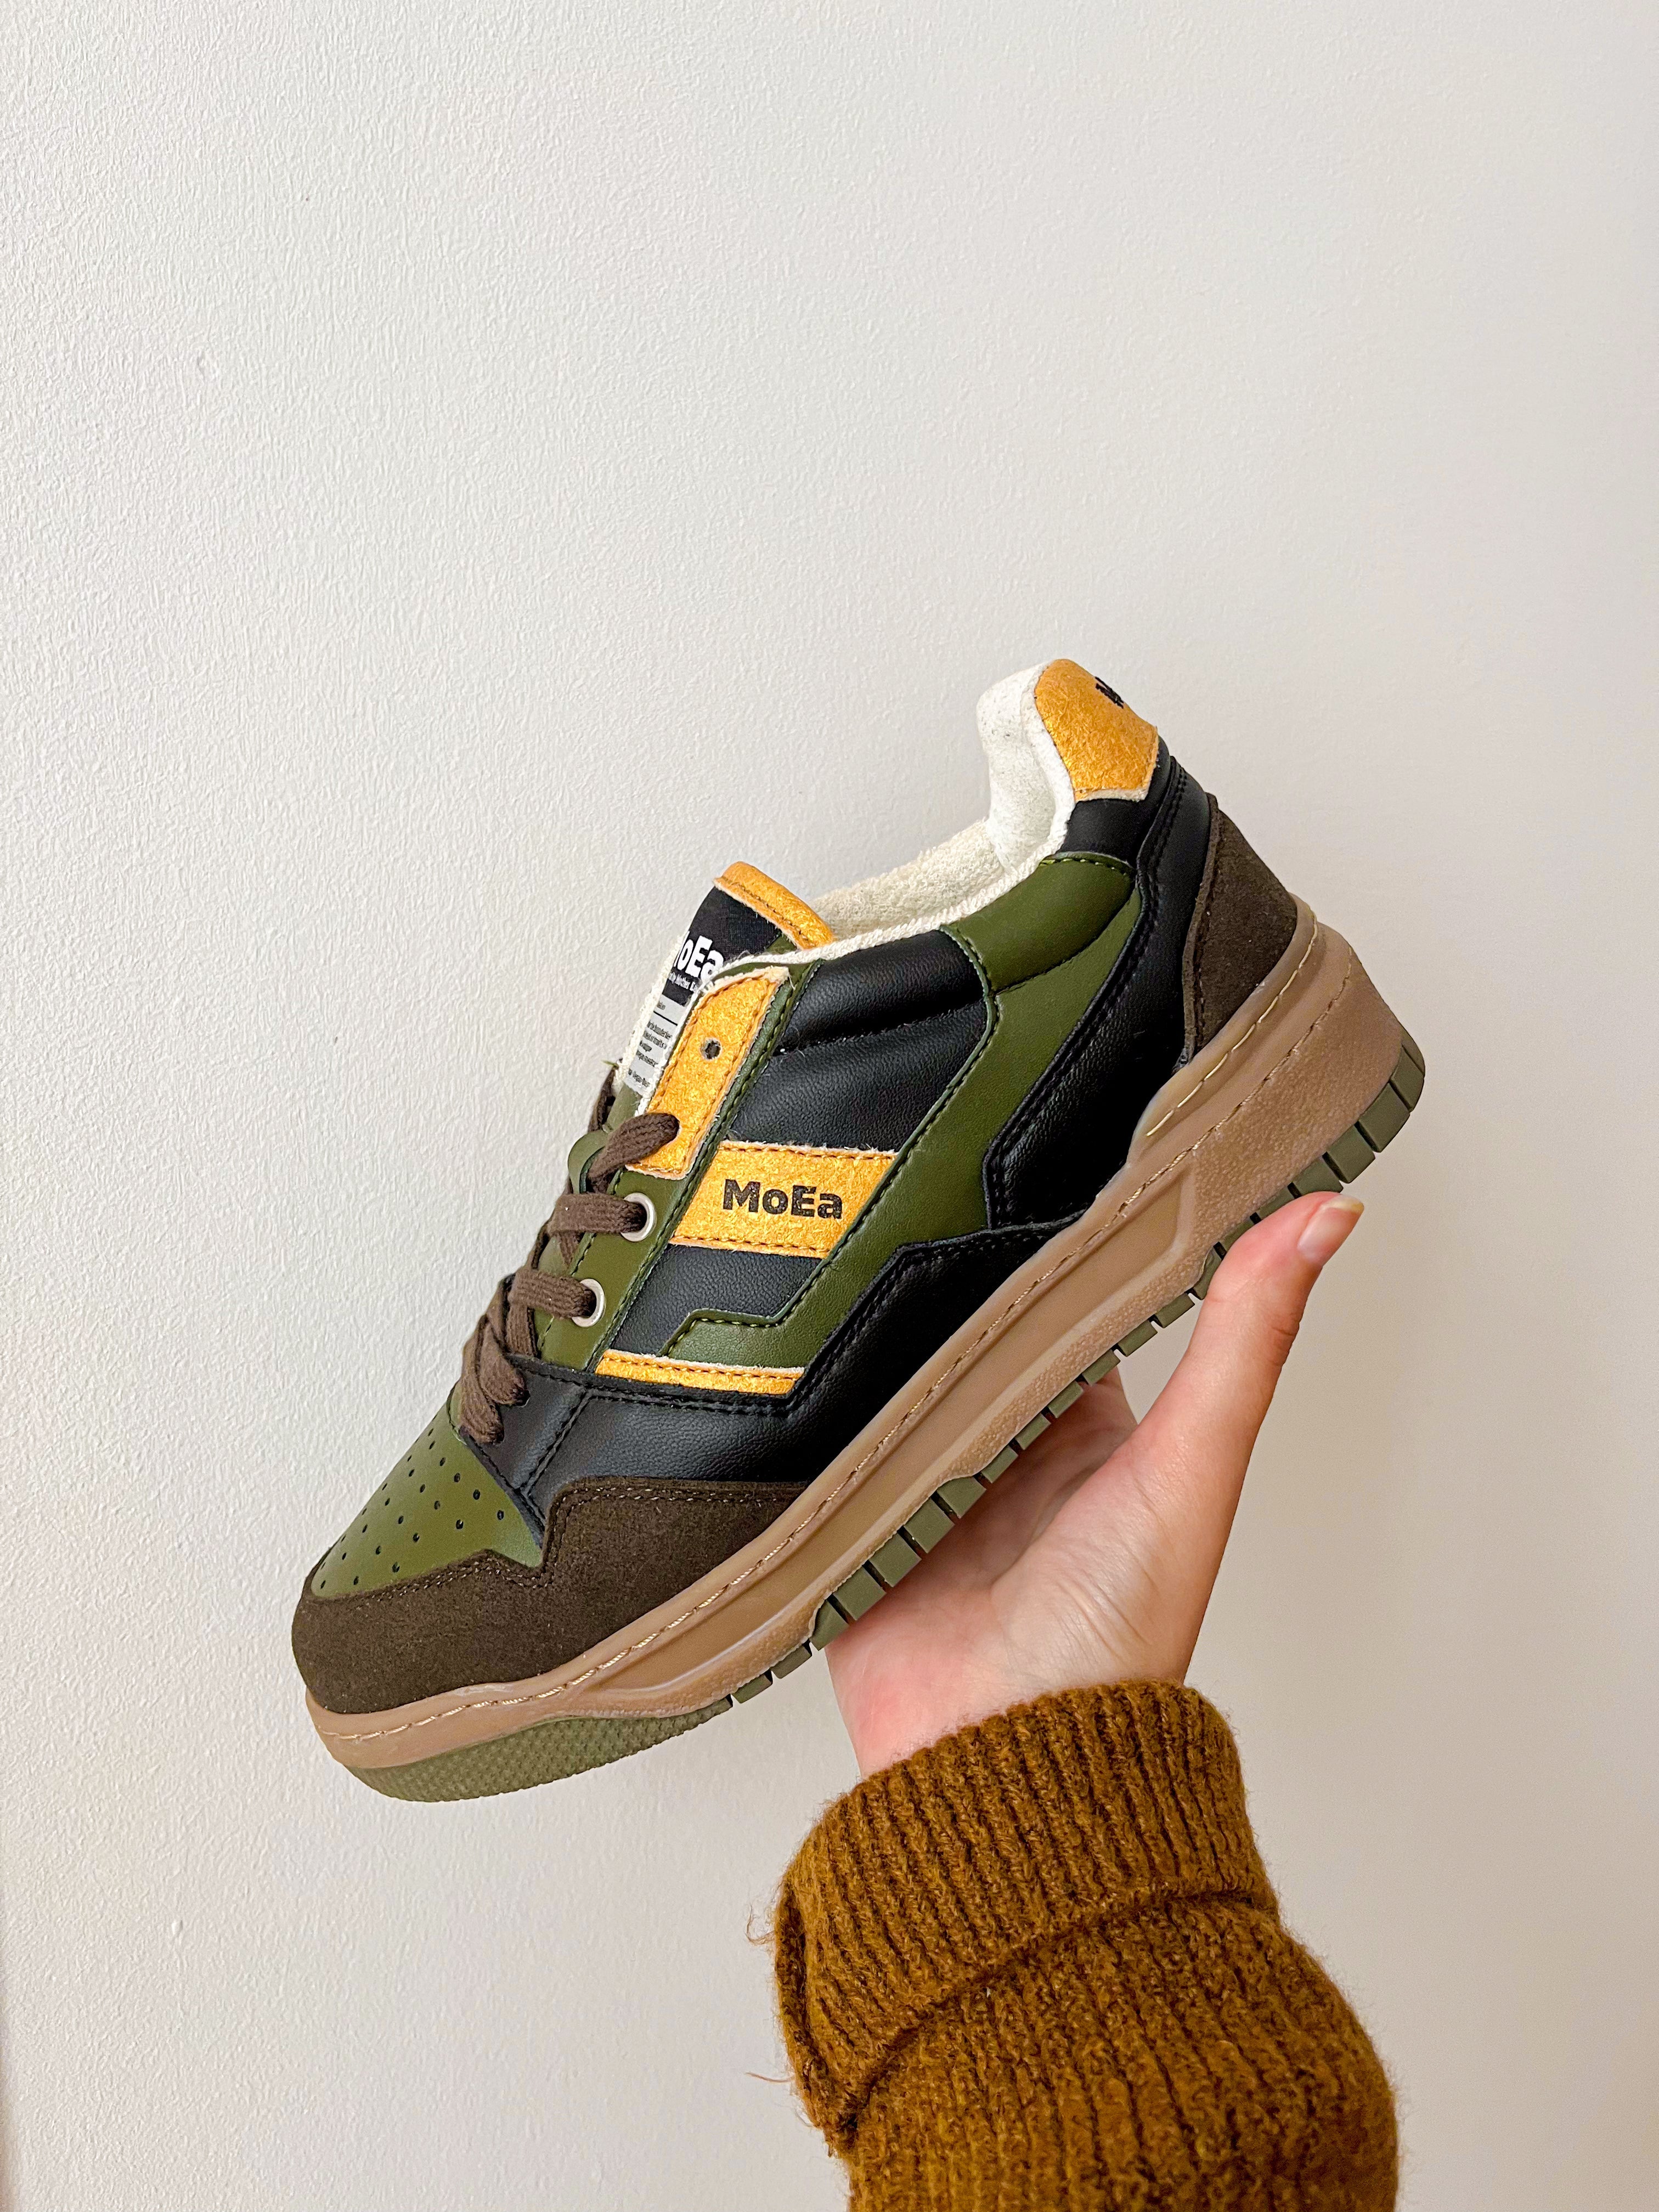 PROTO - GEN2 CROSSOVER GREEN BLACK & PINEAPPLE GOLD SUEDE - 38